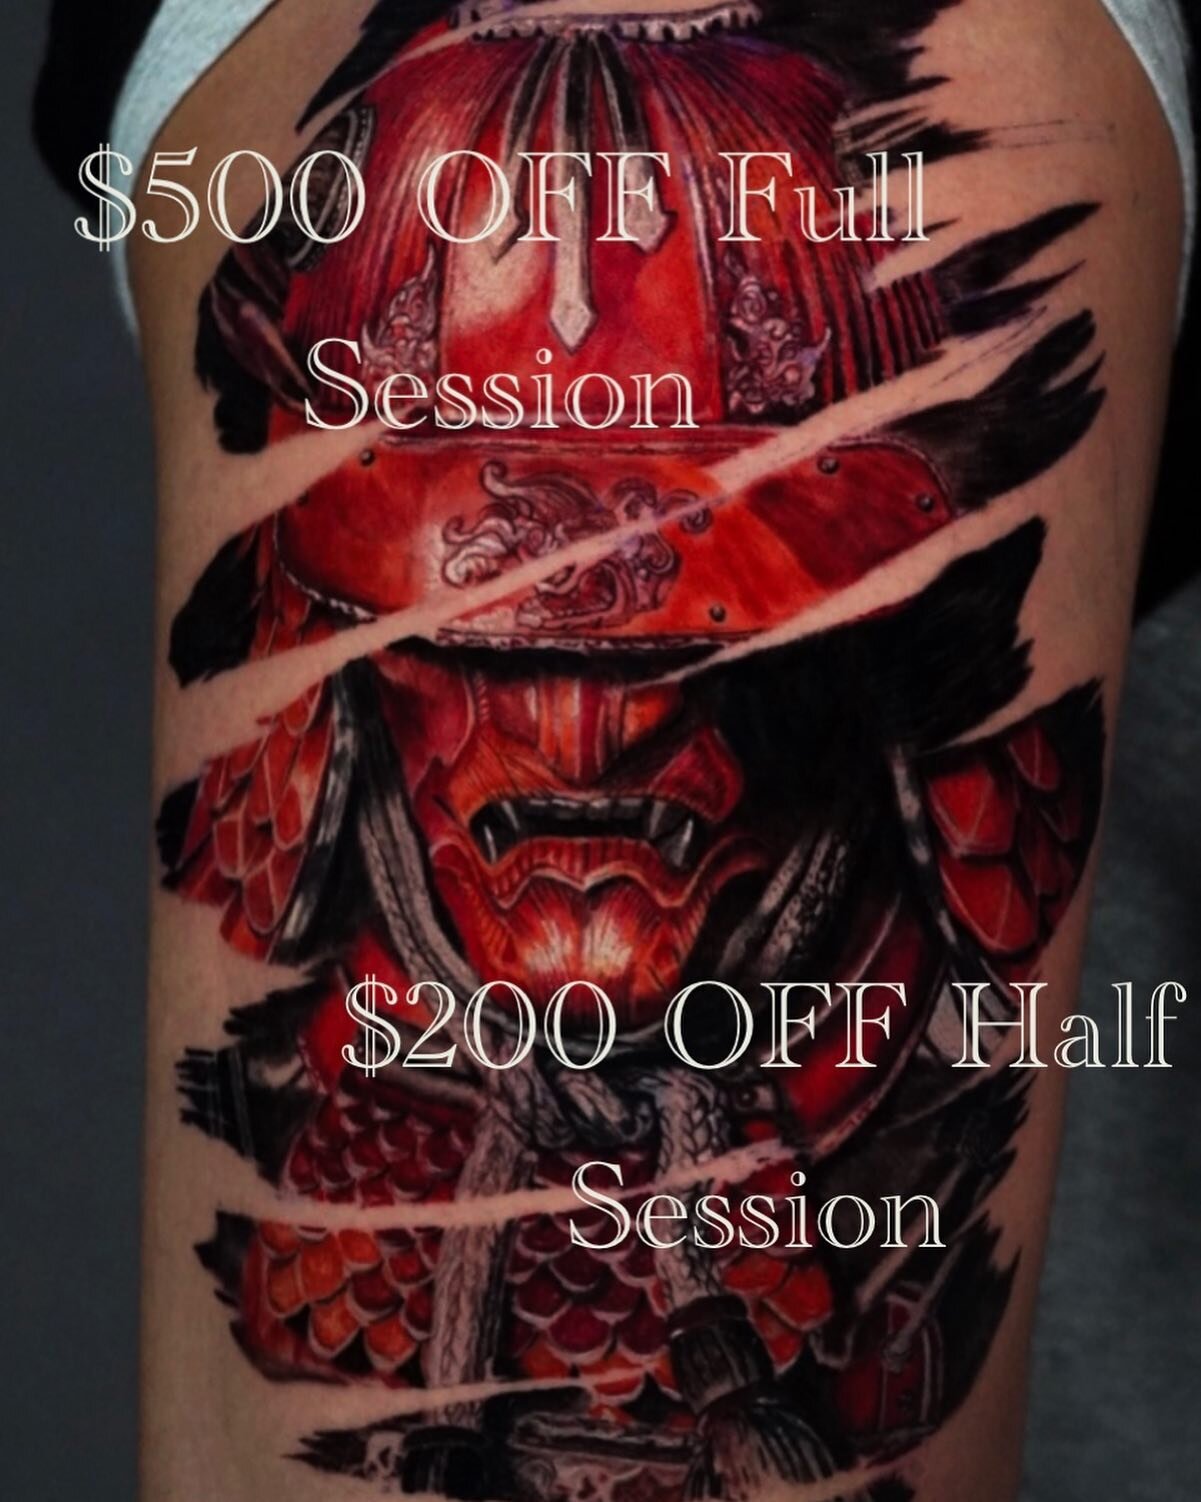 We have time for walk-ins this week. Get in here and get something cool together. 

🔥Up to 40% Off for Traditional Japanese Tattoo

🔥$500 Off Full Session 🔥$200 Off Half Session REALISM | TRADITIONAL | COLOR TATTOO 

@tuong.tattoo790 

Tuesday to 